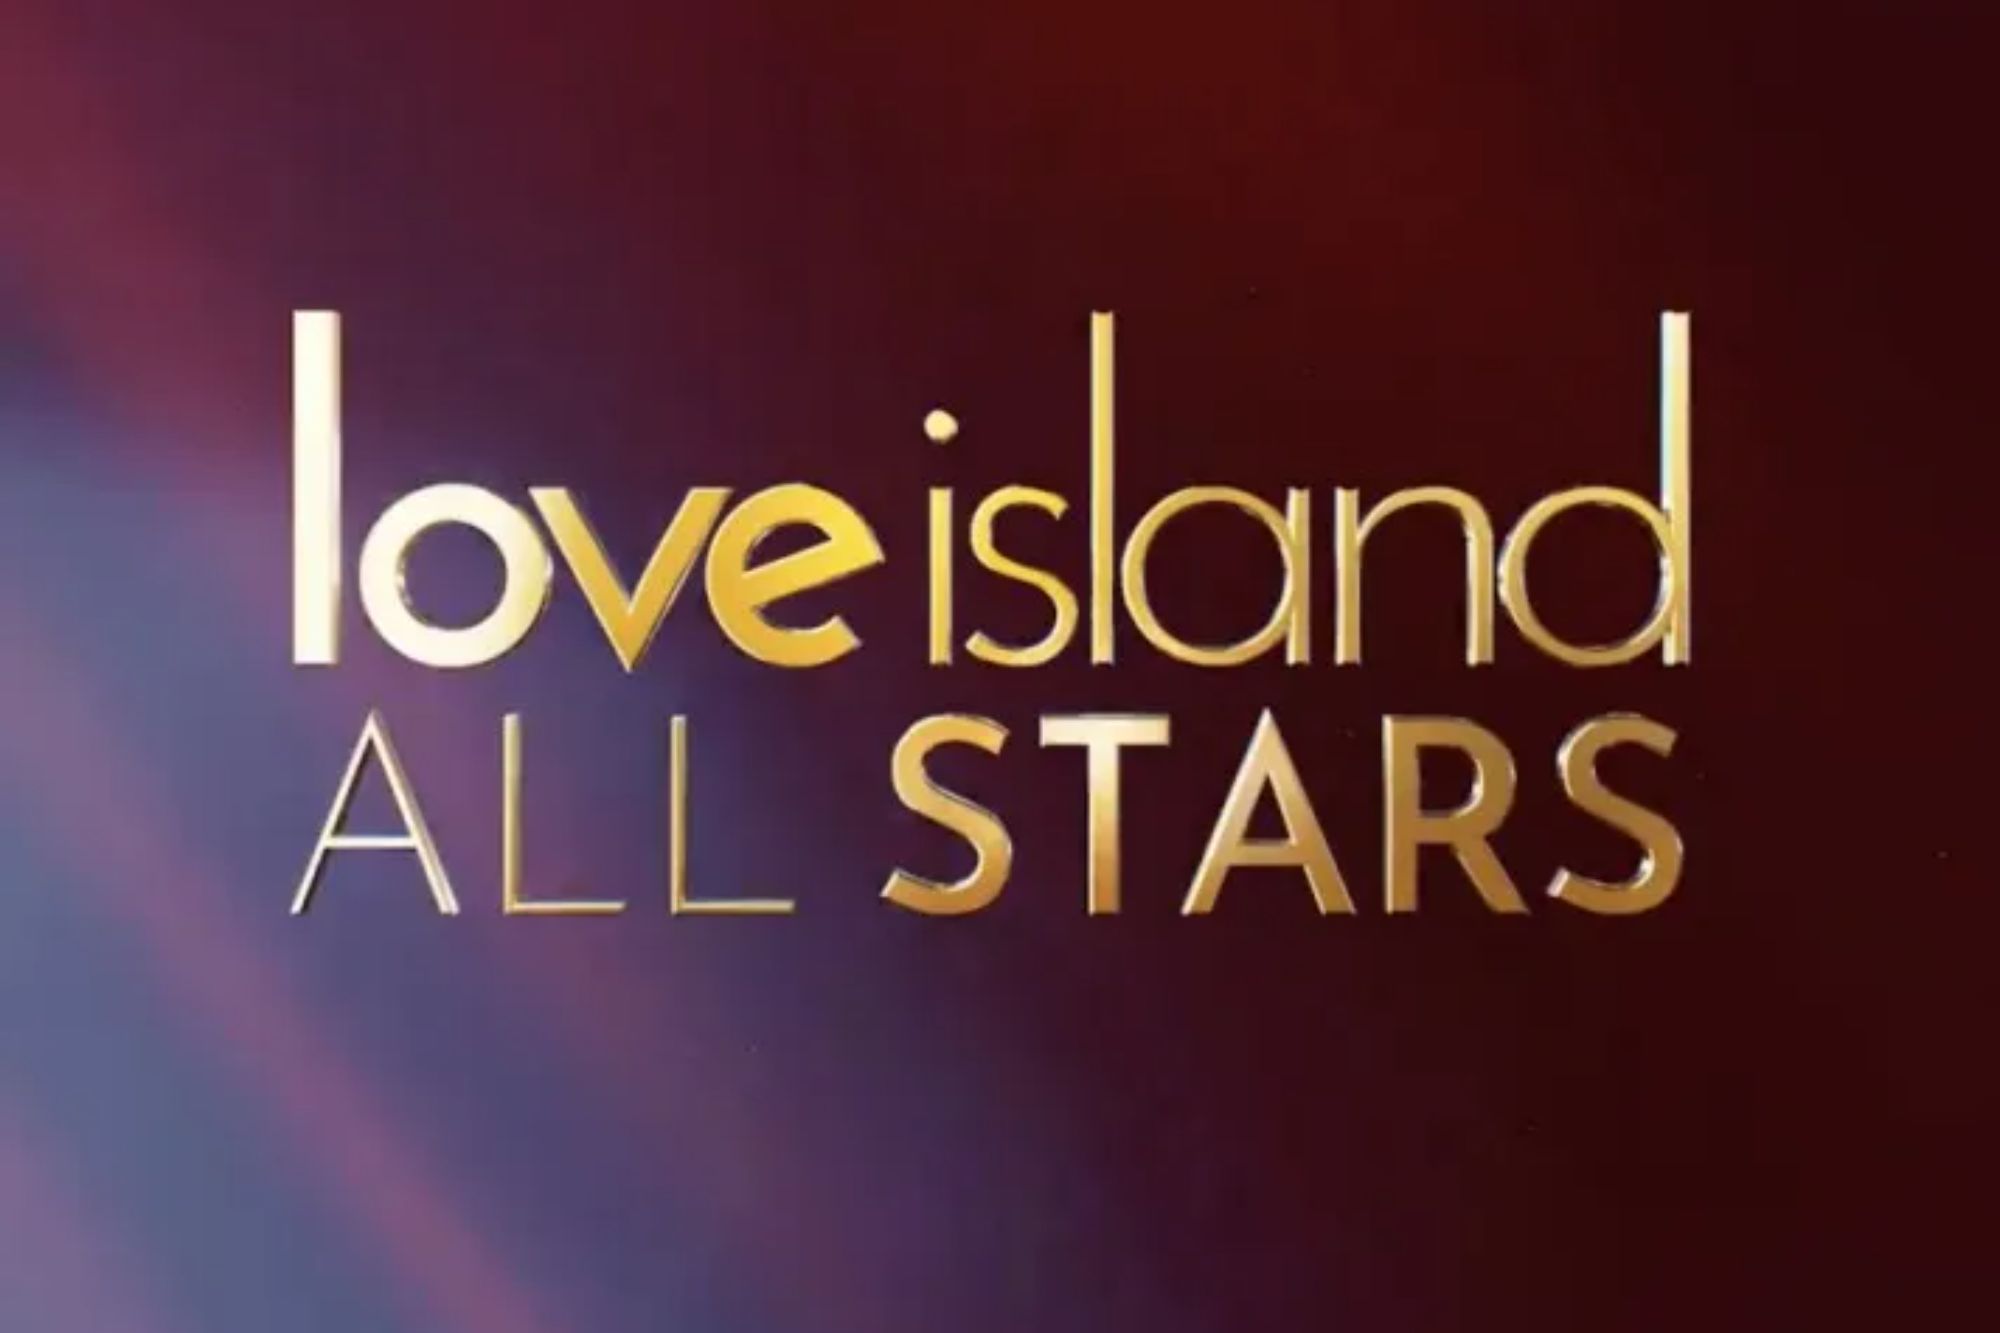 Love Island fans spot All Star on dating app looking for romance